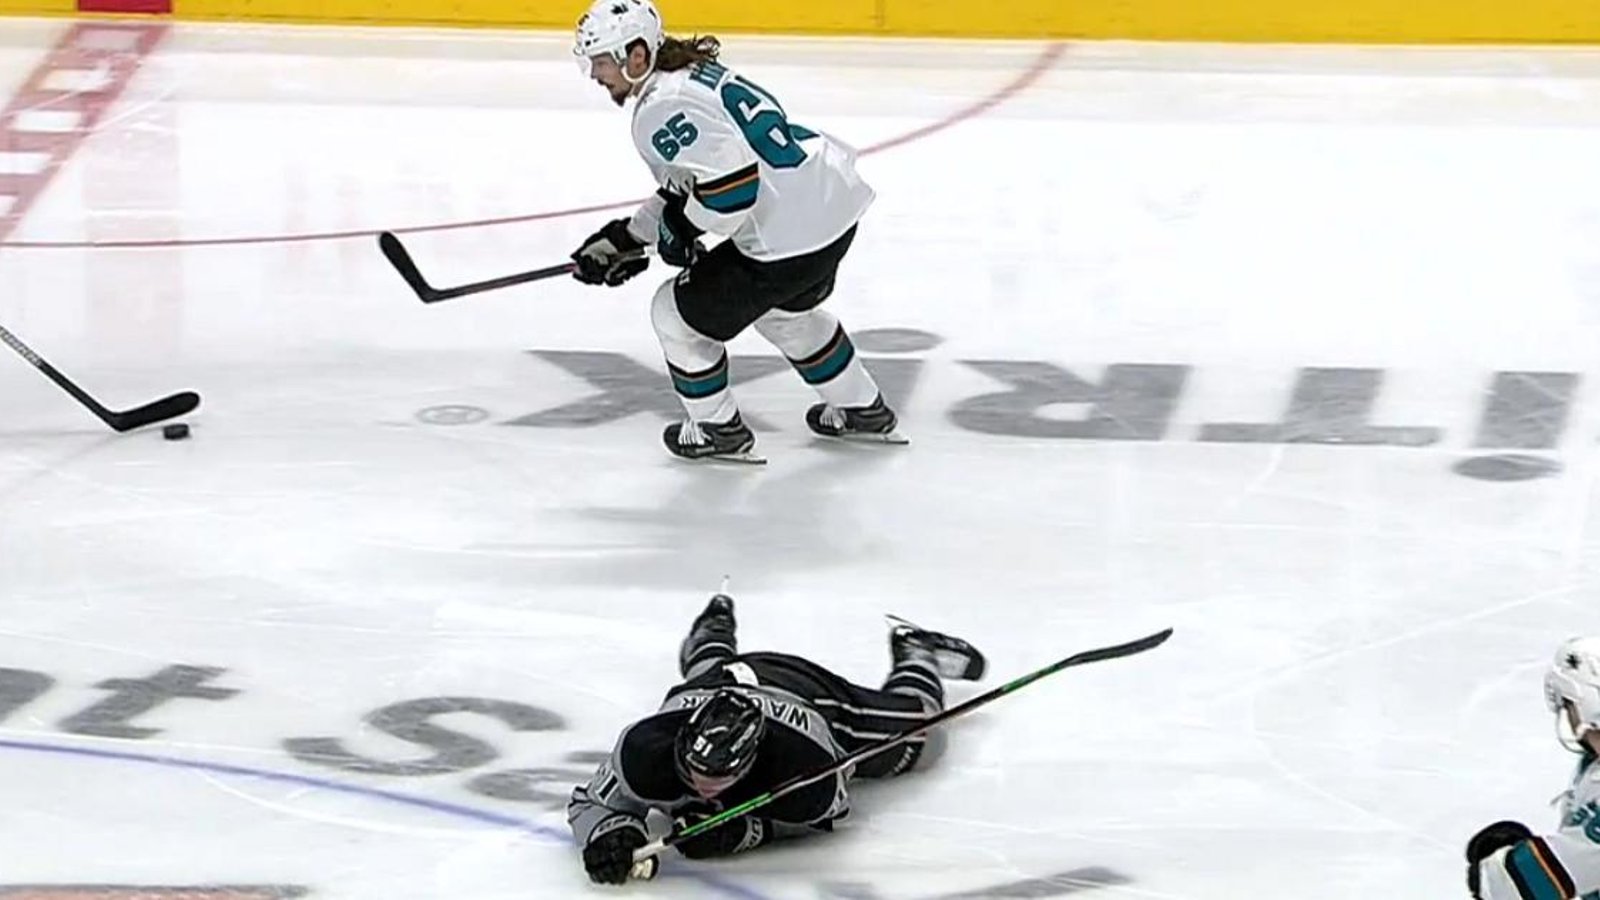 Erik Karlsson sends rookie to the locker room with an ugly head shot.